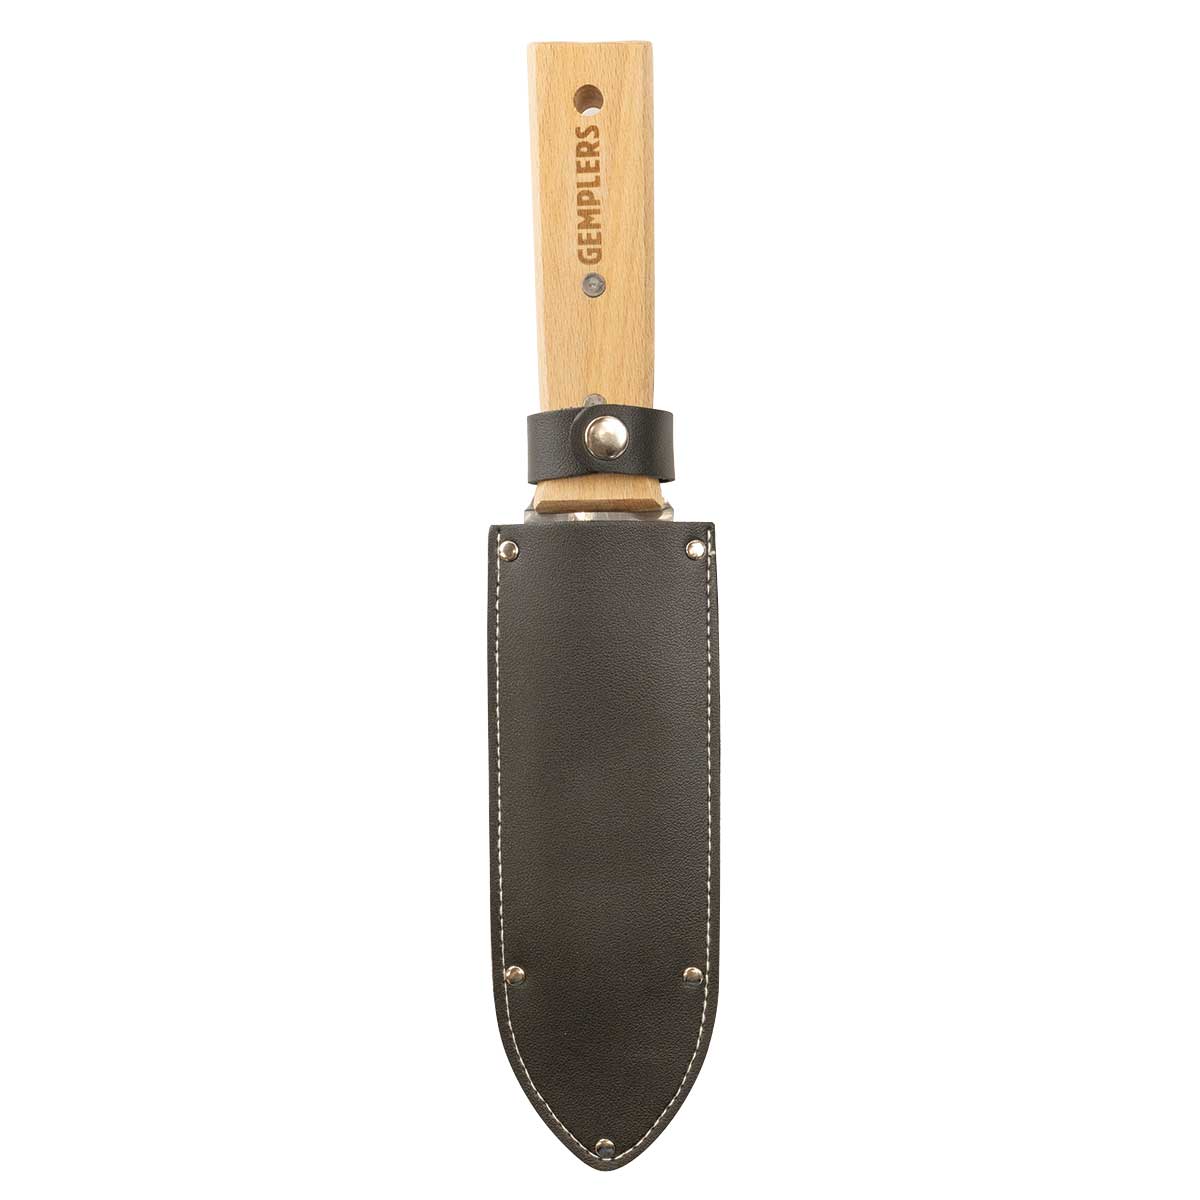 Gemplers Hori Hori Knife with Wood Handle